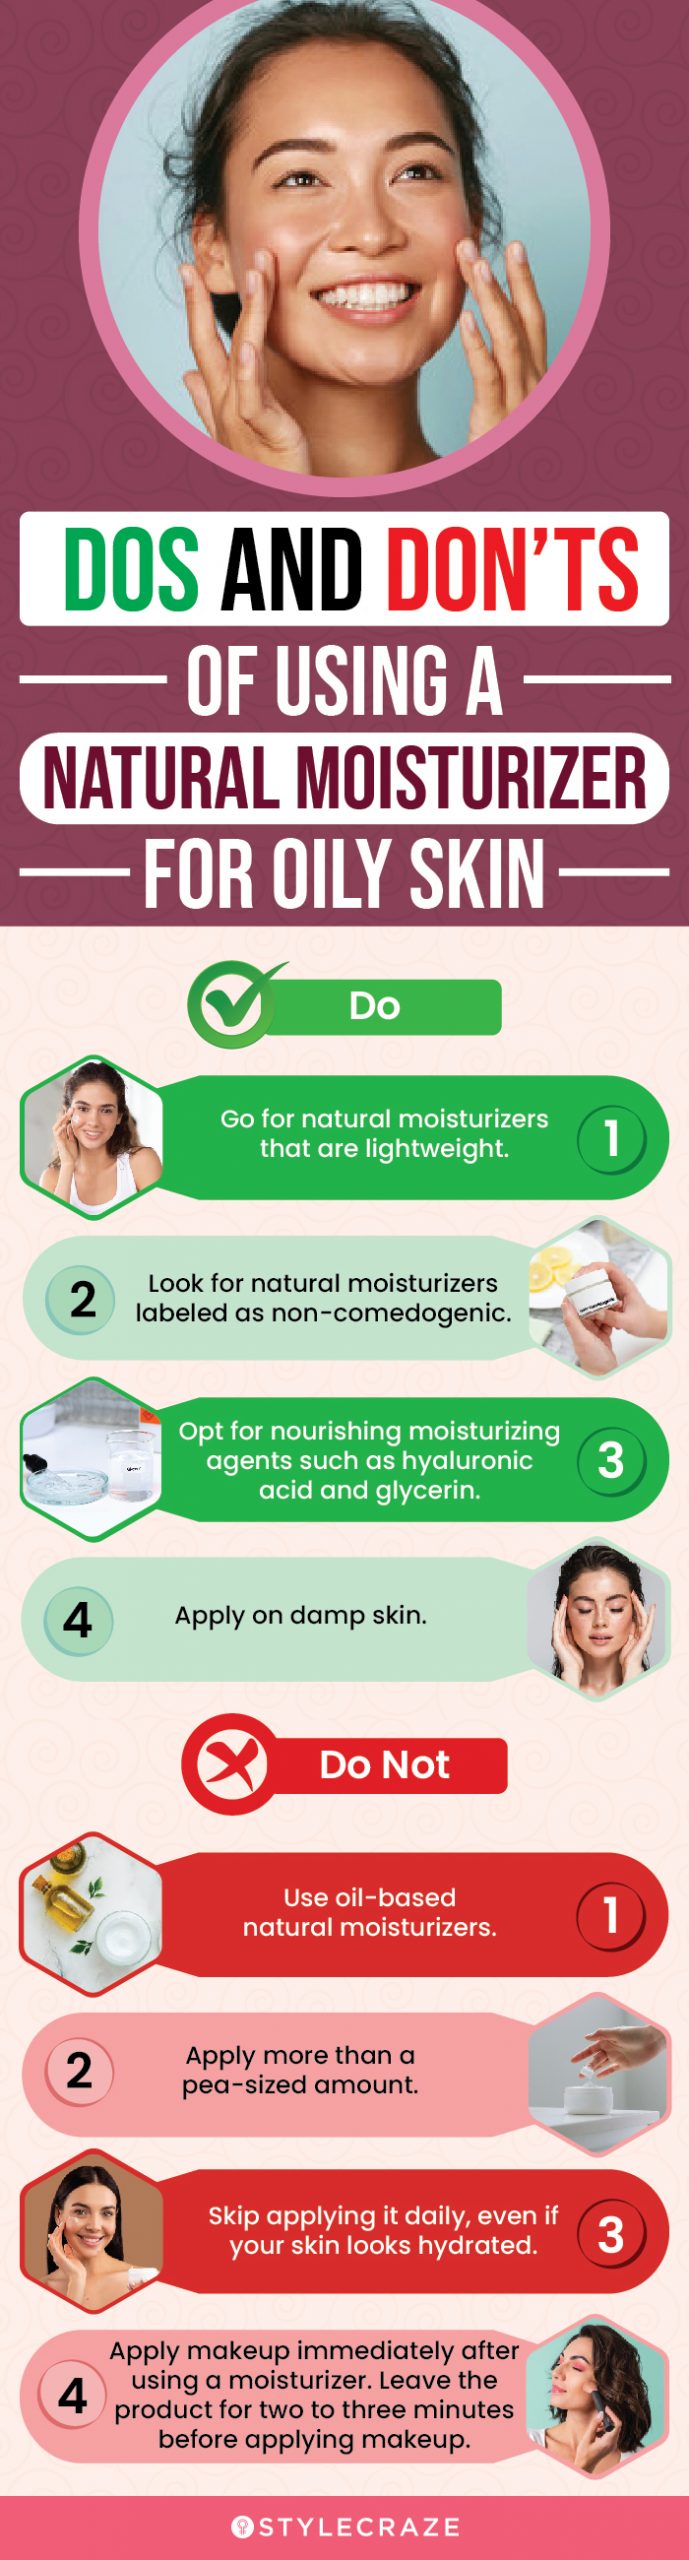 Dos And Don’ts Of Using A Natural Moisturizer For Oily Skin (infographic)